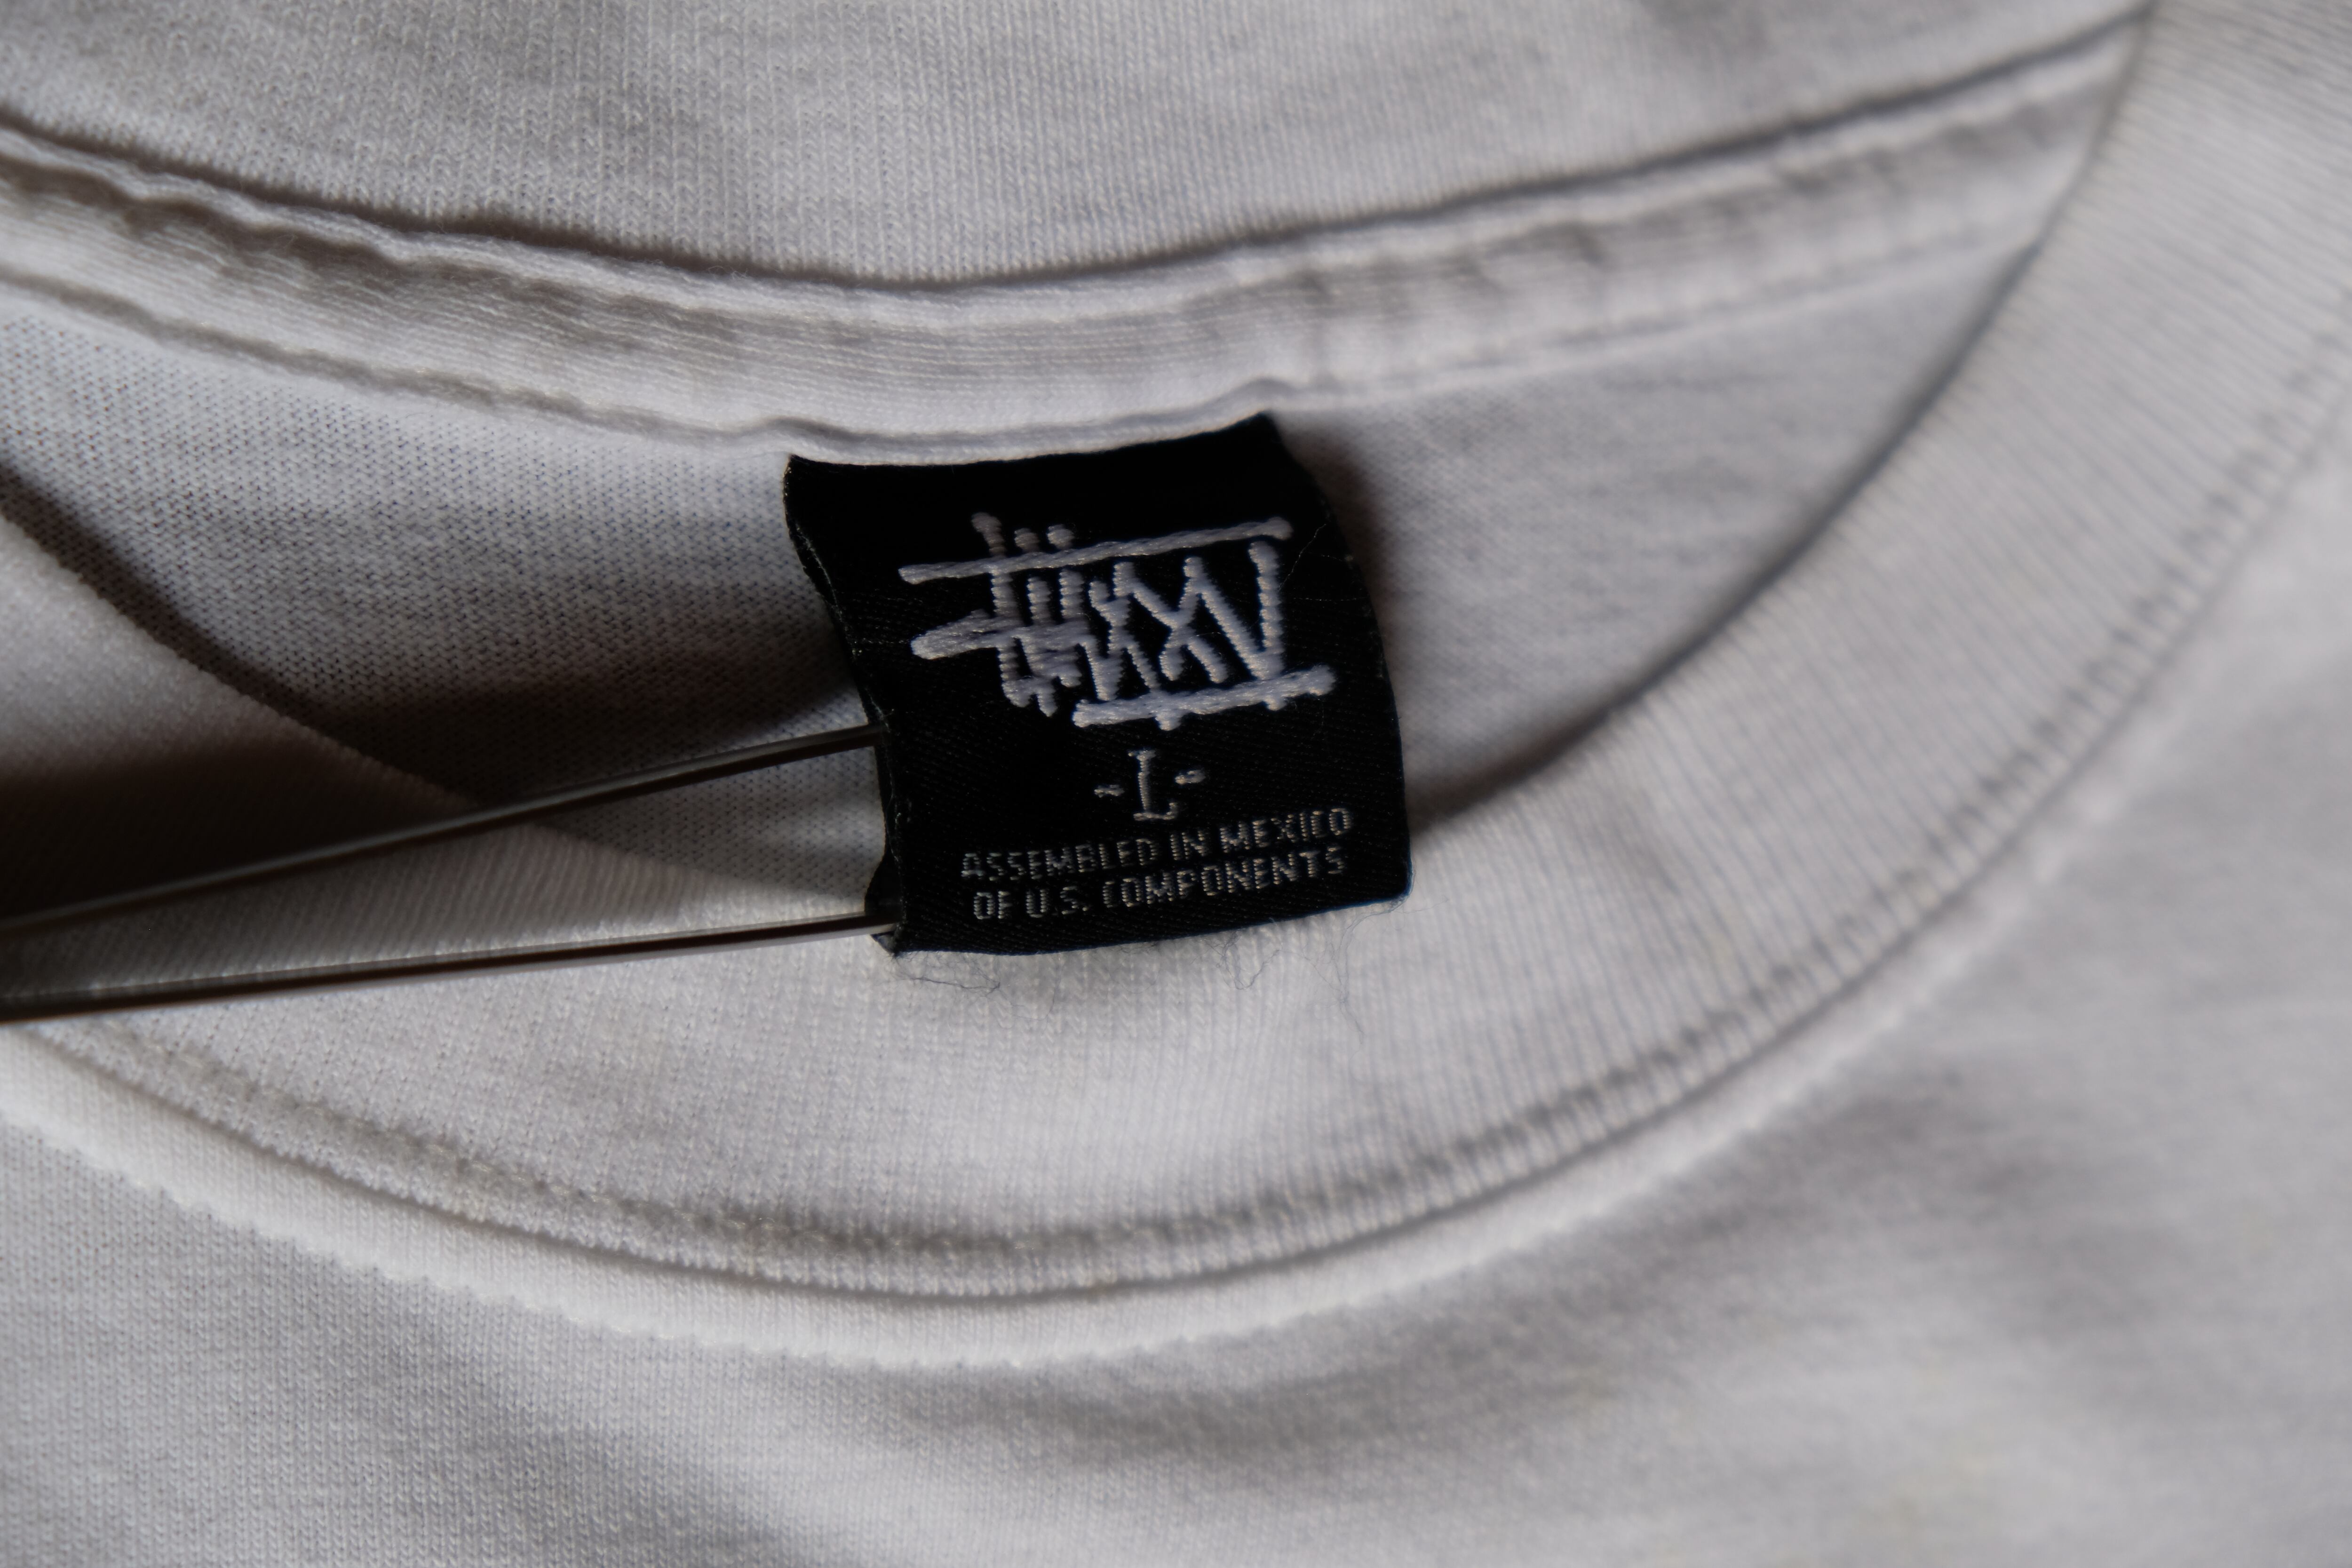 stussy】printT-shirt 2005 ＂スプレー缶＂oldstussy made in MEXICO 